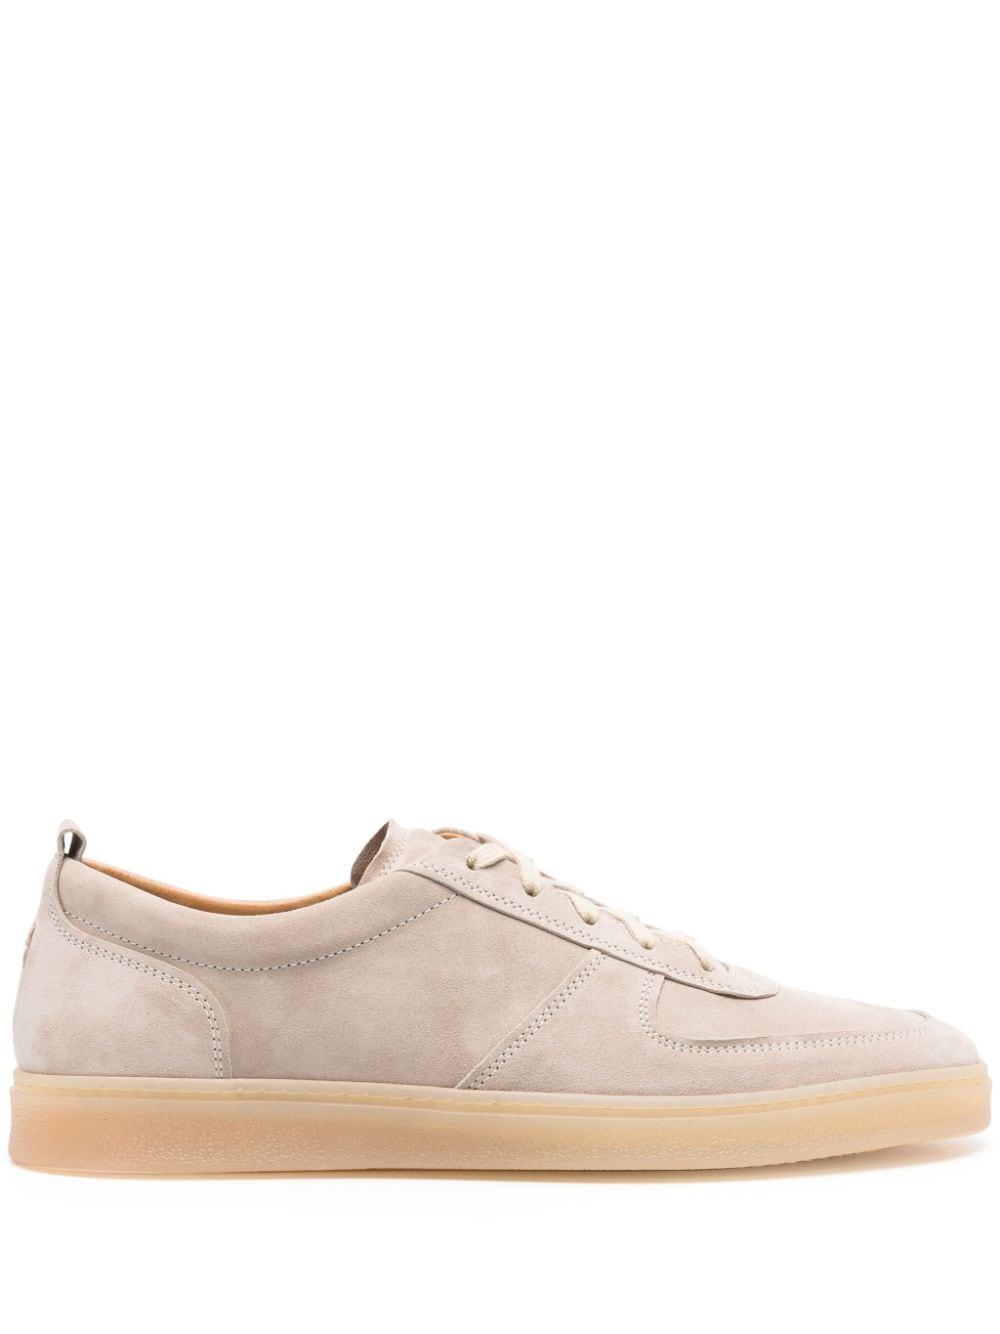 Henderson Baracco Clyde Suede Sneakers In Neutrals